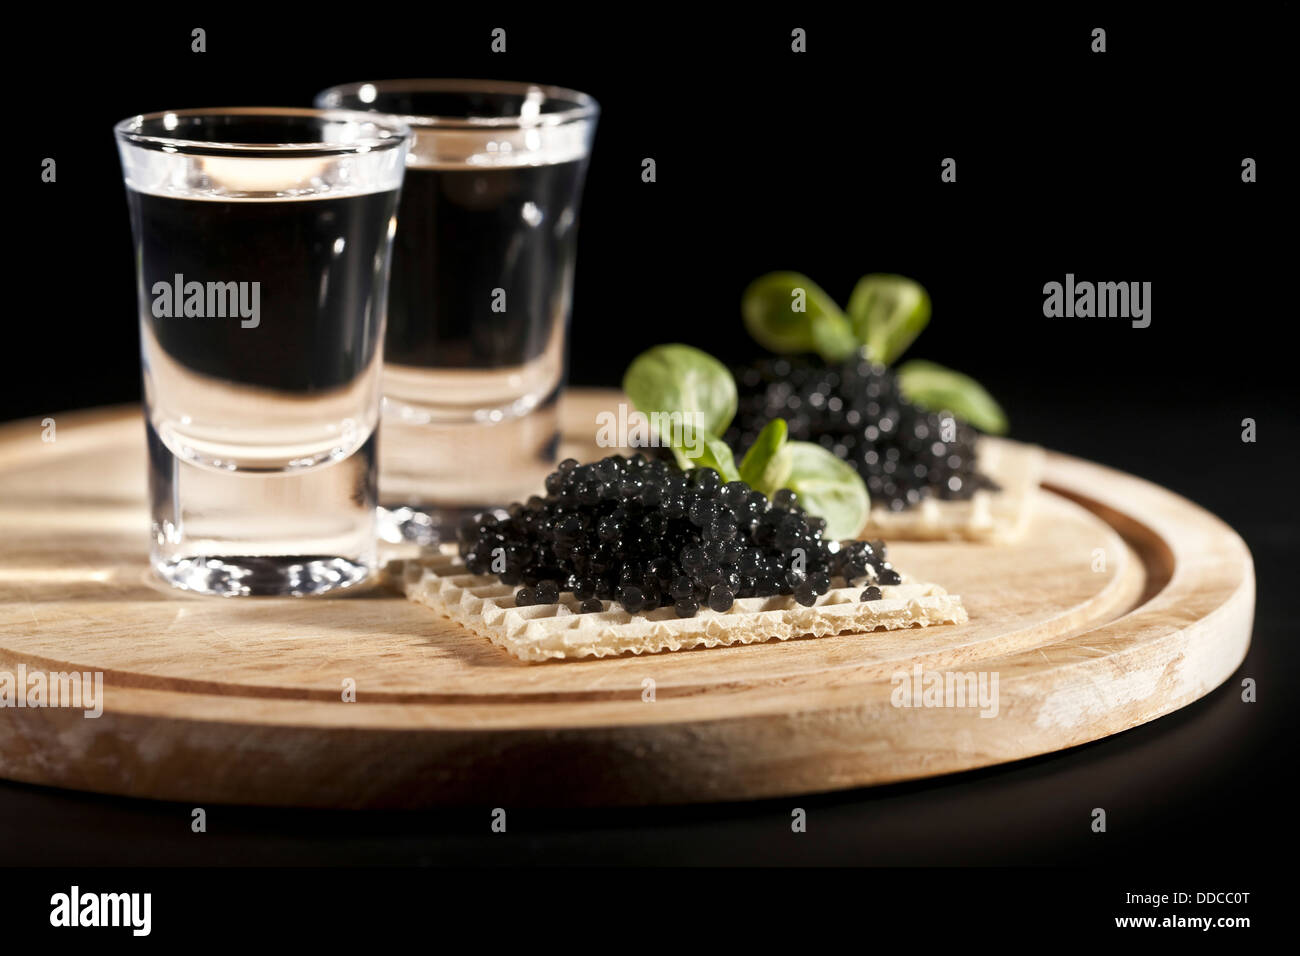 served place setting: vodka and sandwiches with black caviar on black background Stock Photo